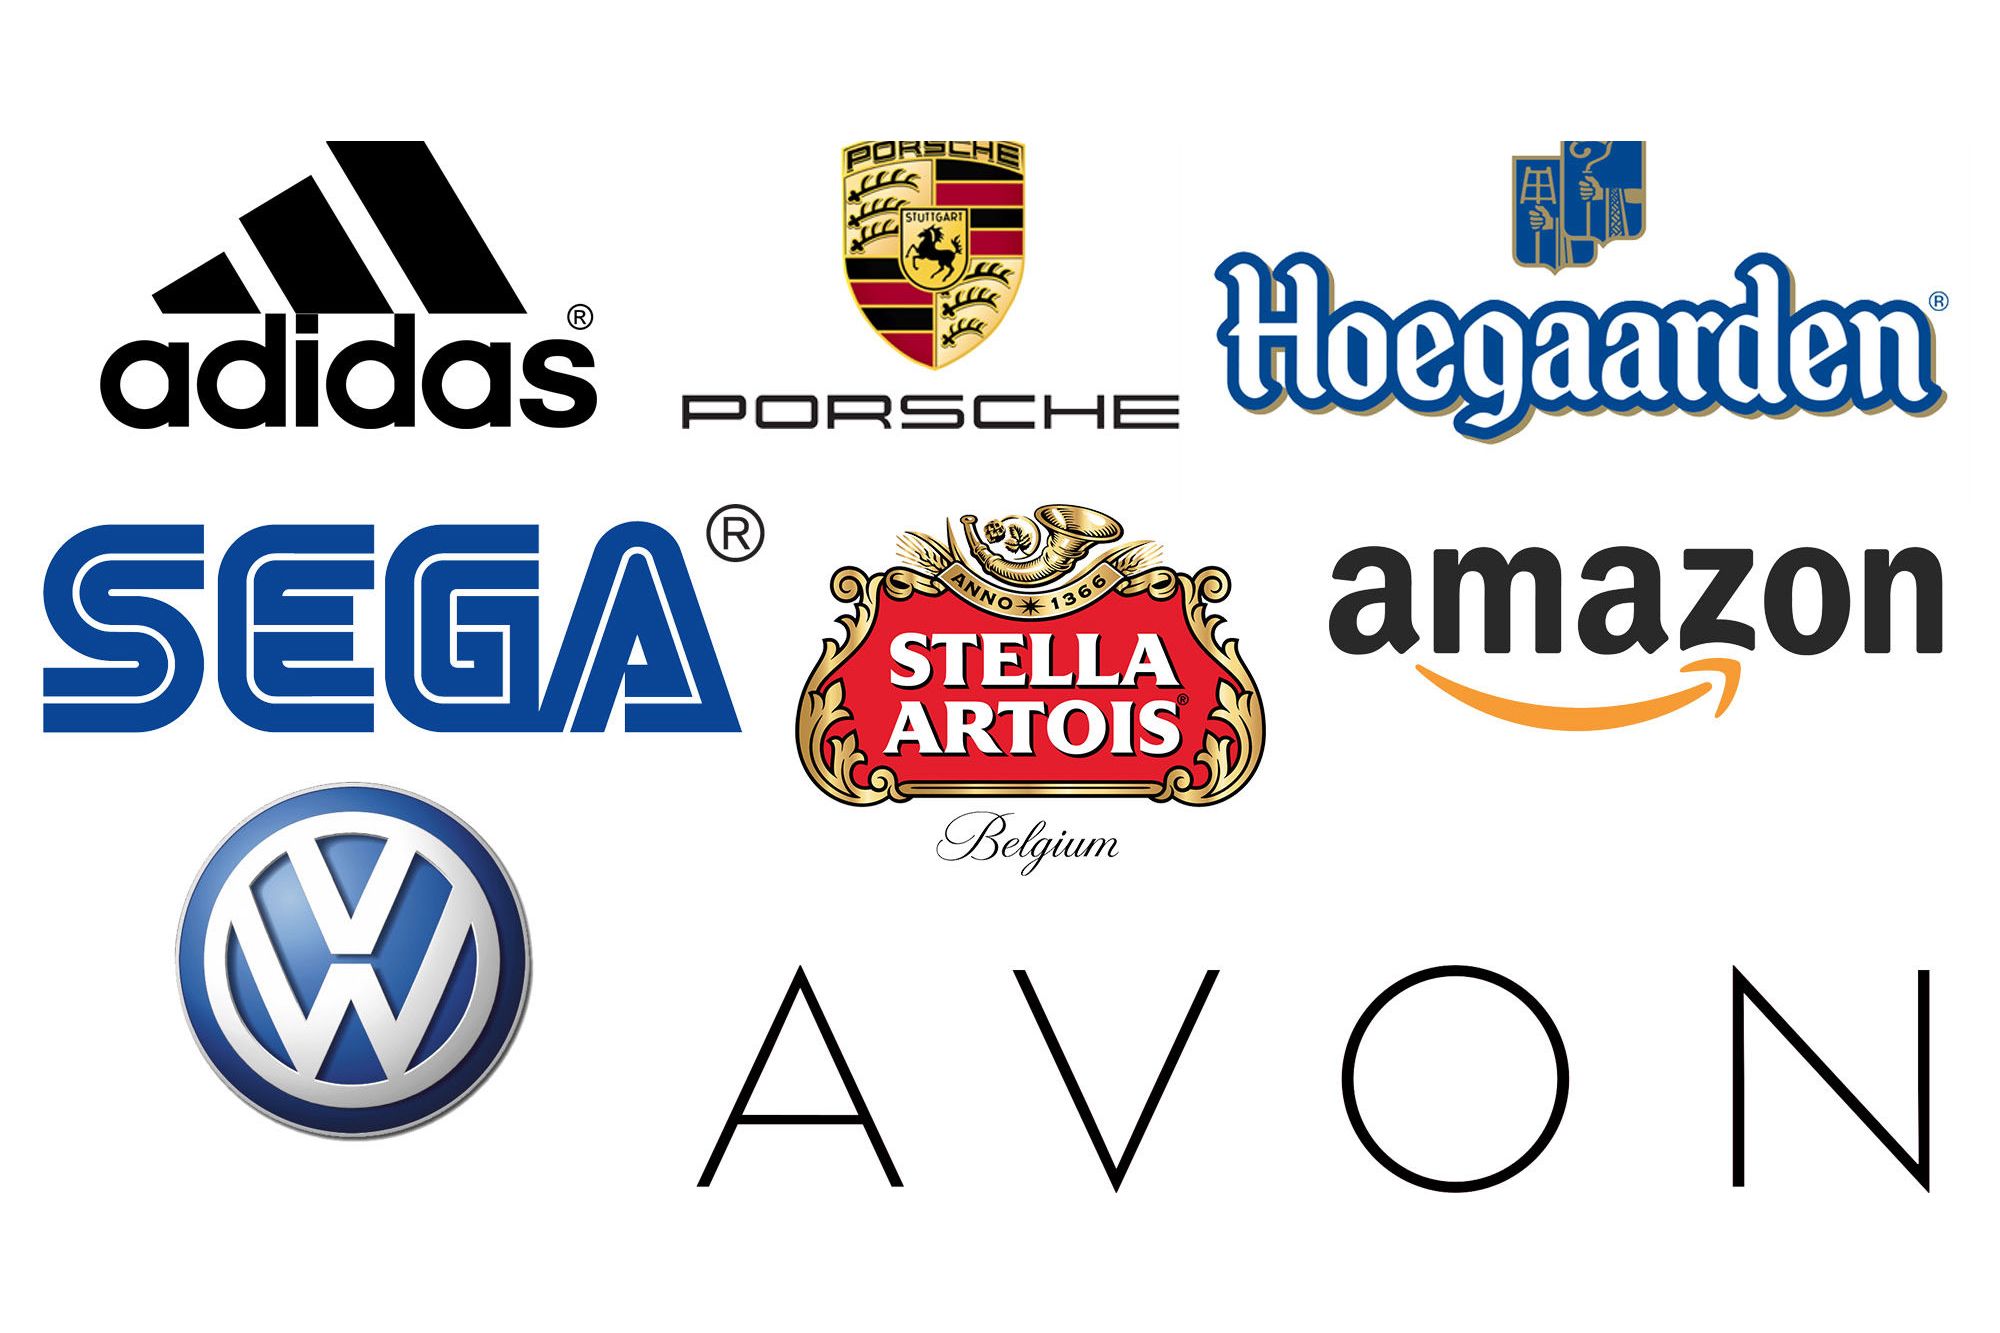 Do you know how to pronounce these brands names?